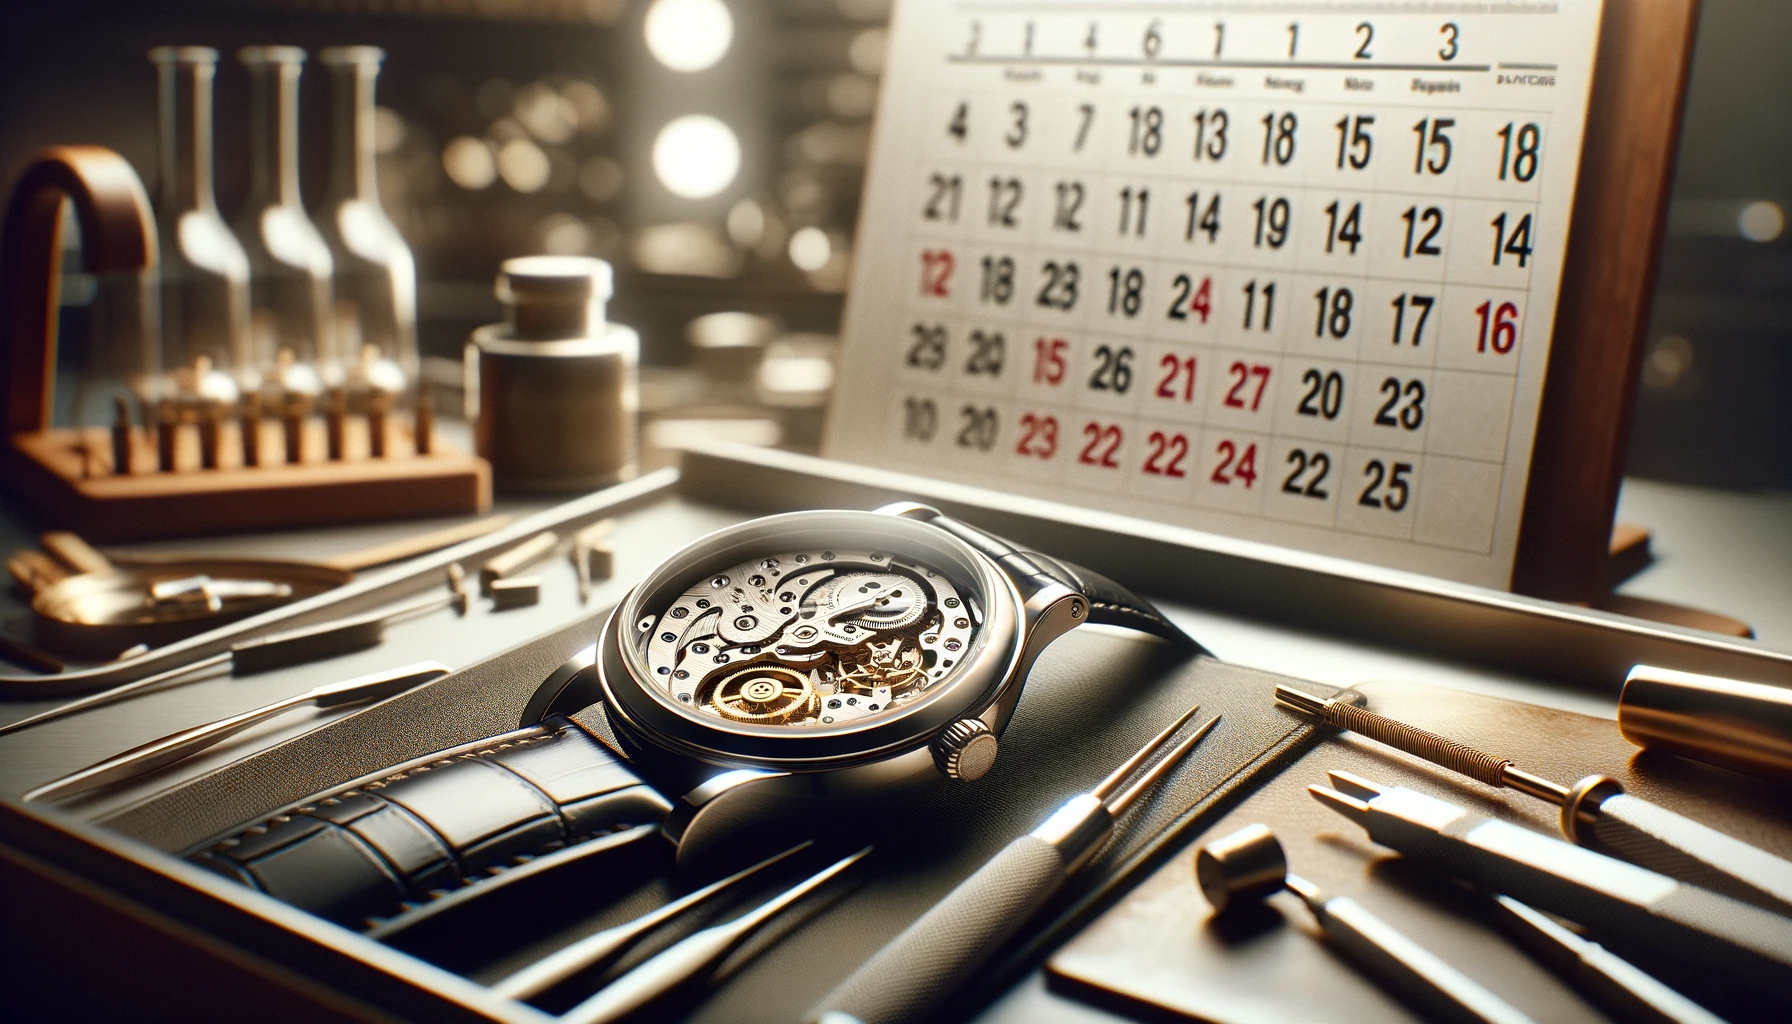 An elegant wristwatch lies open on a workbench, its back removed to reveal the inner mechanics. A calendar with marked dates hangs on the wall behind it, symbolizing the timing for battery replacement. The scene captures the essence of precision, care, and the critical timing involved in the maintenance of a luxury watch. The atmosphere is that of a professional watchmaker's workshop, with specialized tools neatly arranged, ready for the delicate task of battery replacement.